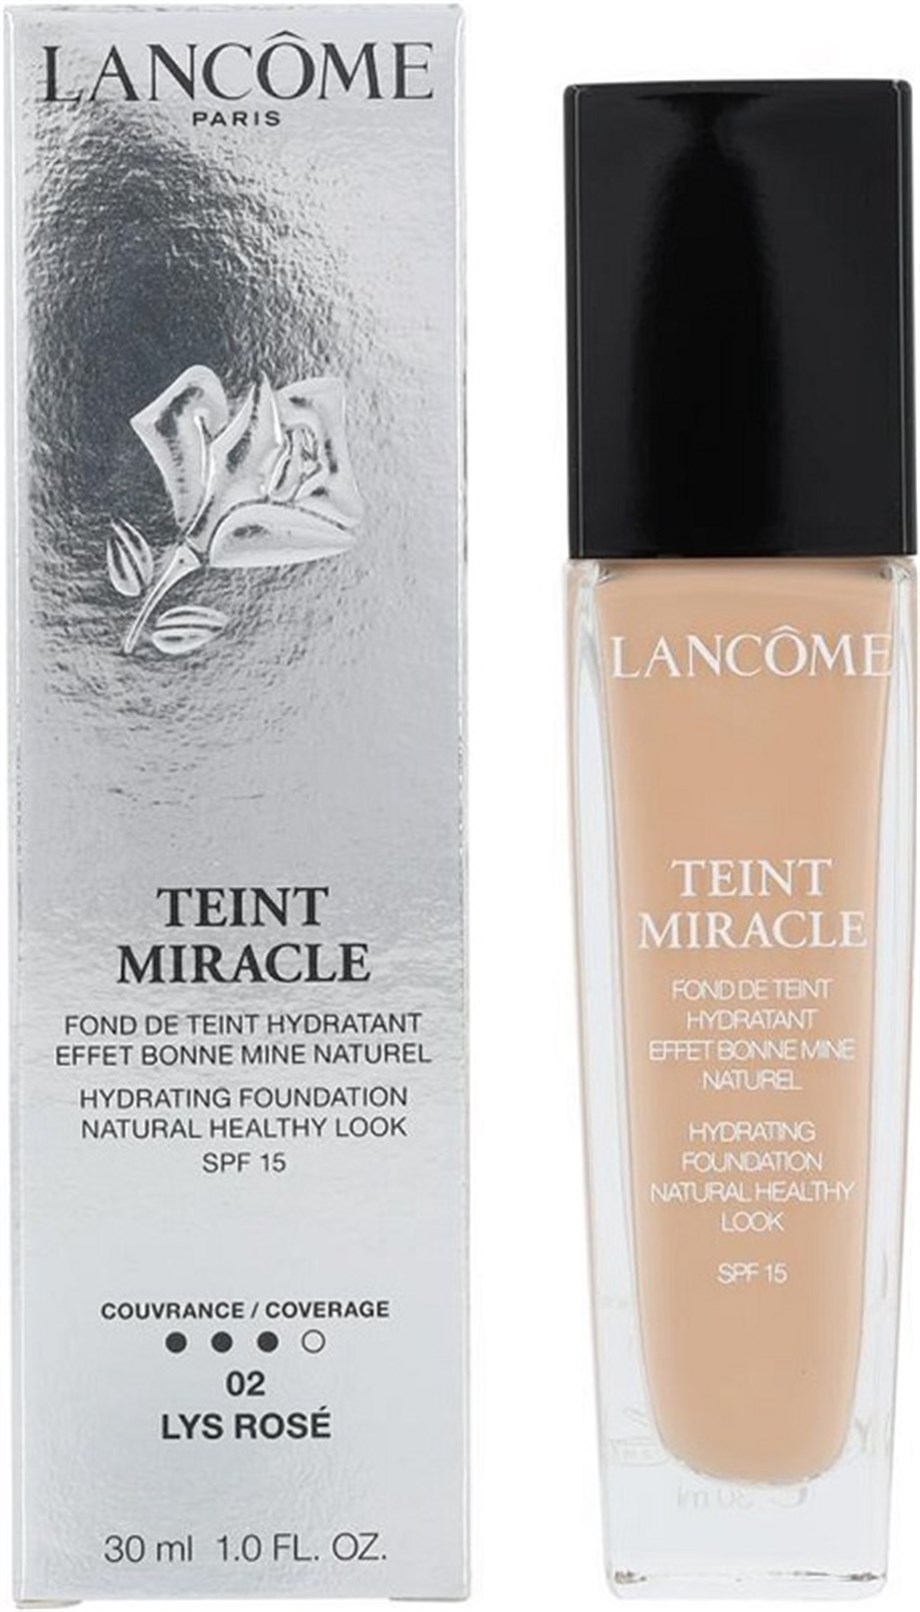 Lancome Teint Miracle Hydrating Foundation Spf15 02 Lys Rose 30 ml